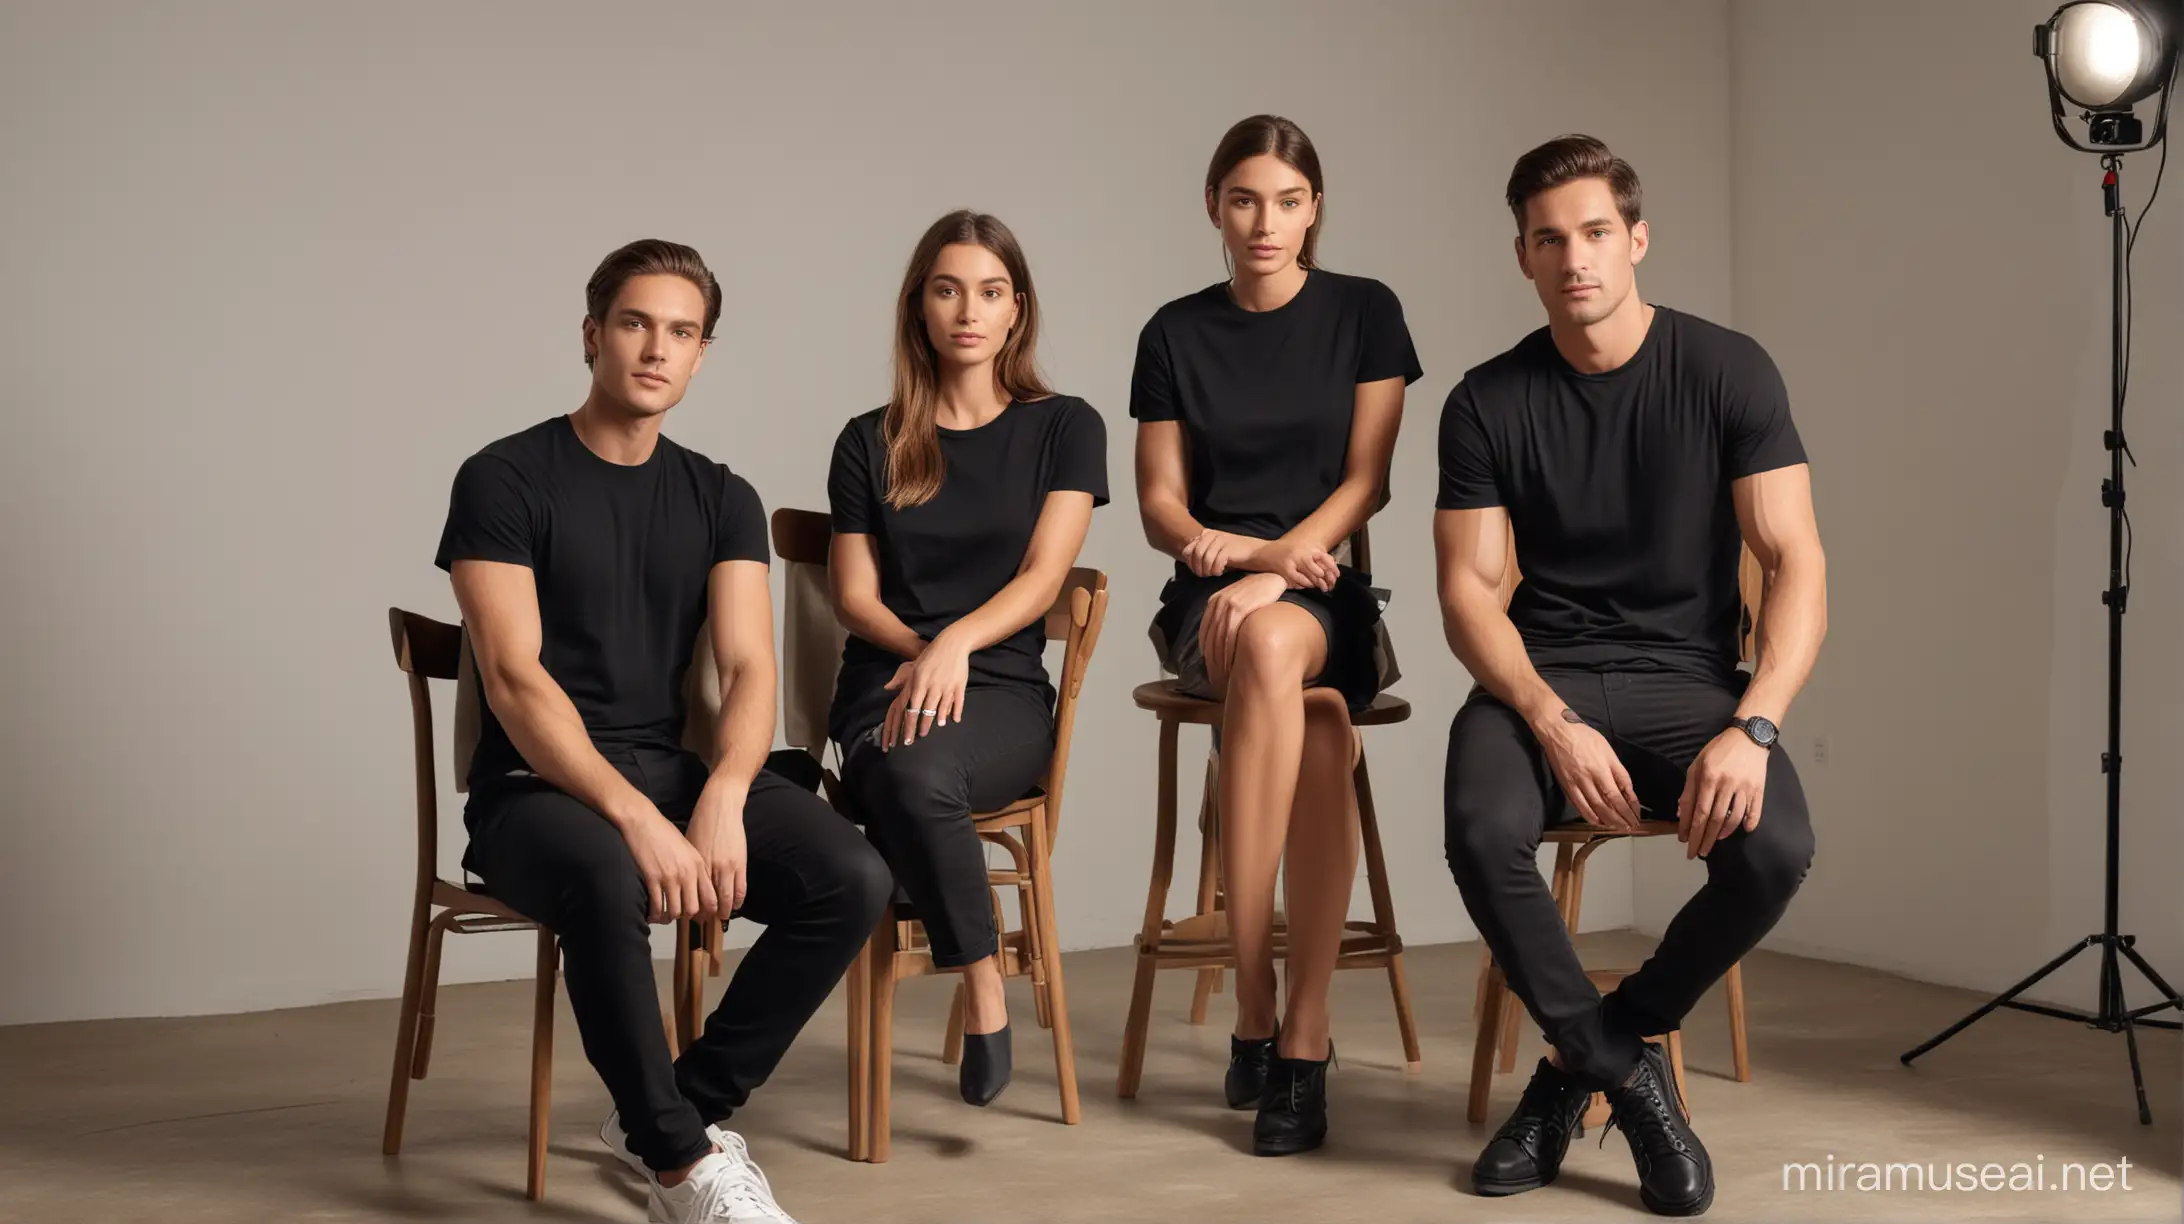 3 models, 2 male and 1 female in plain black t-shirt, one of them sits on chair and other are in standing position, in living area of a house modeling for a clothing brand with professional lighting.